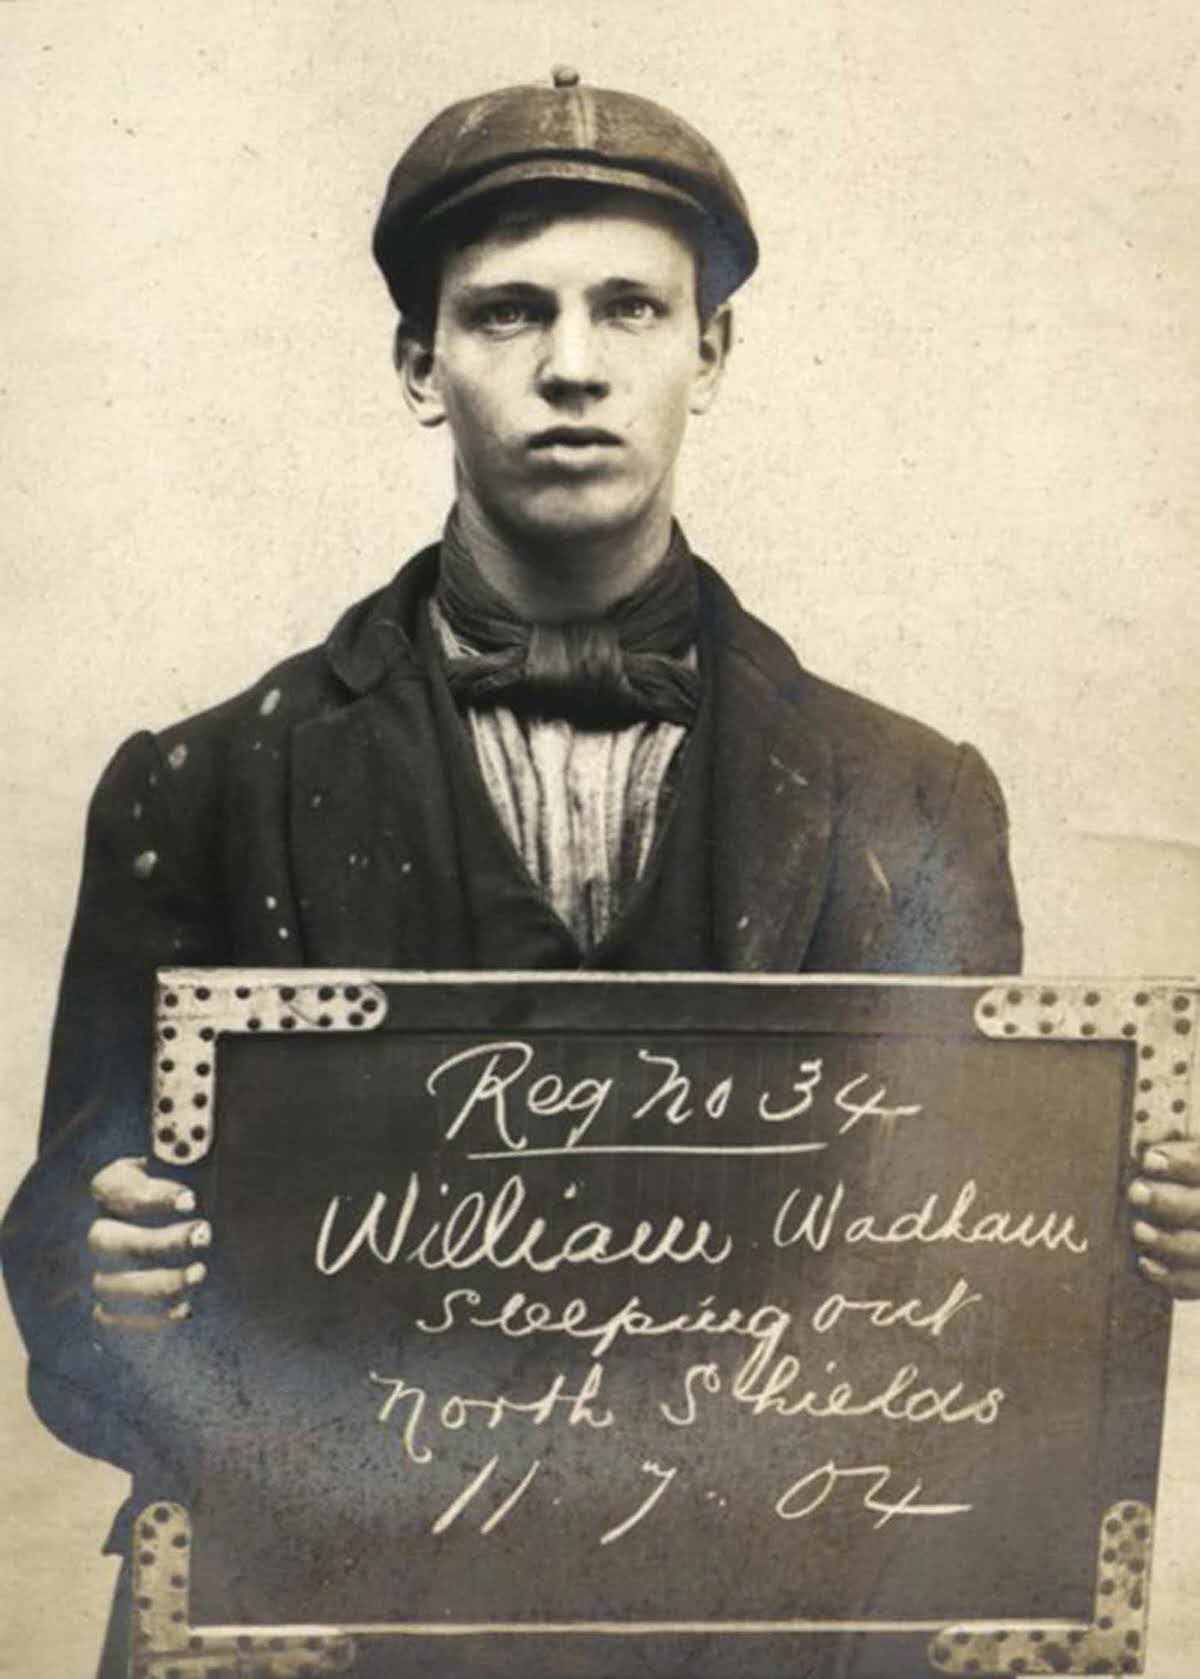 William Wadham, age unknown, arrested for sleeping outdoors, 1904.